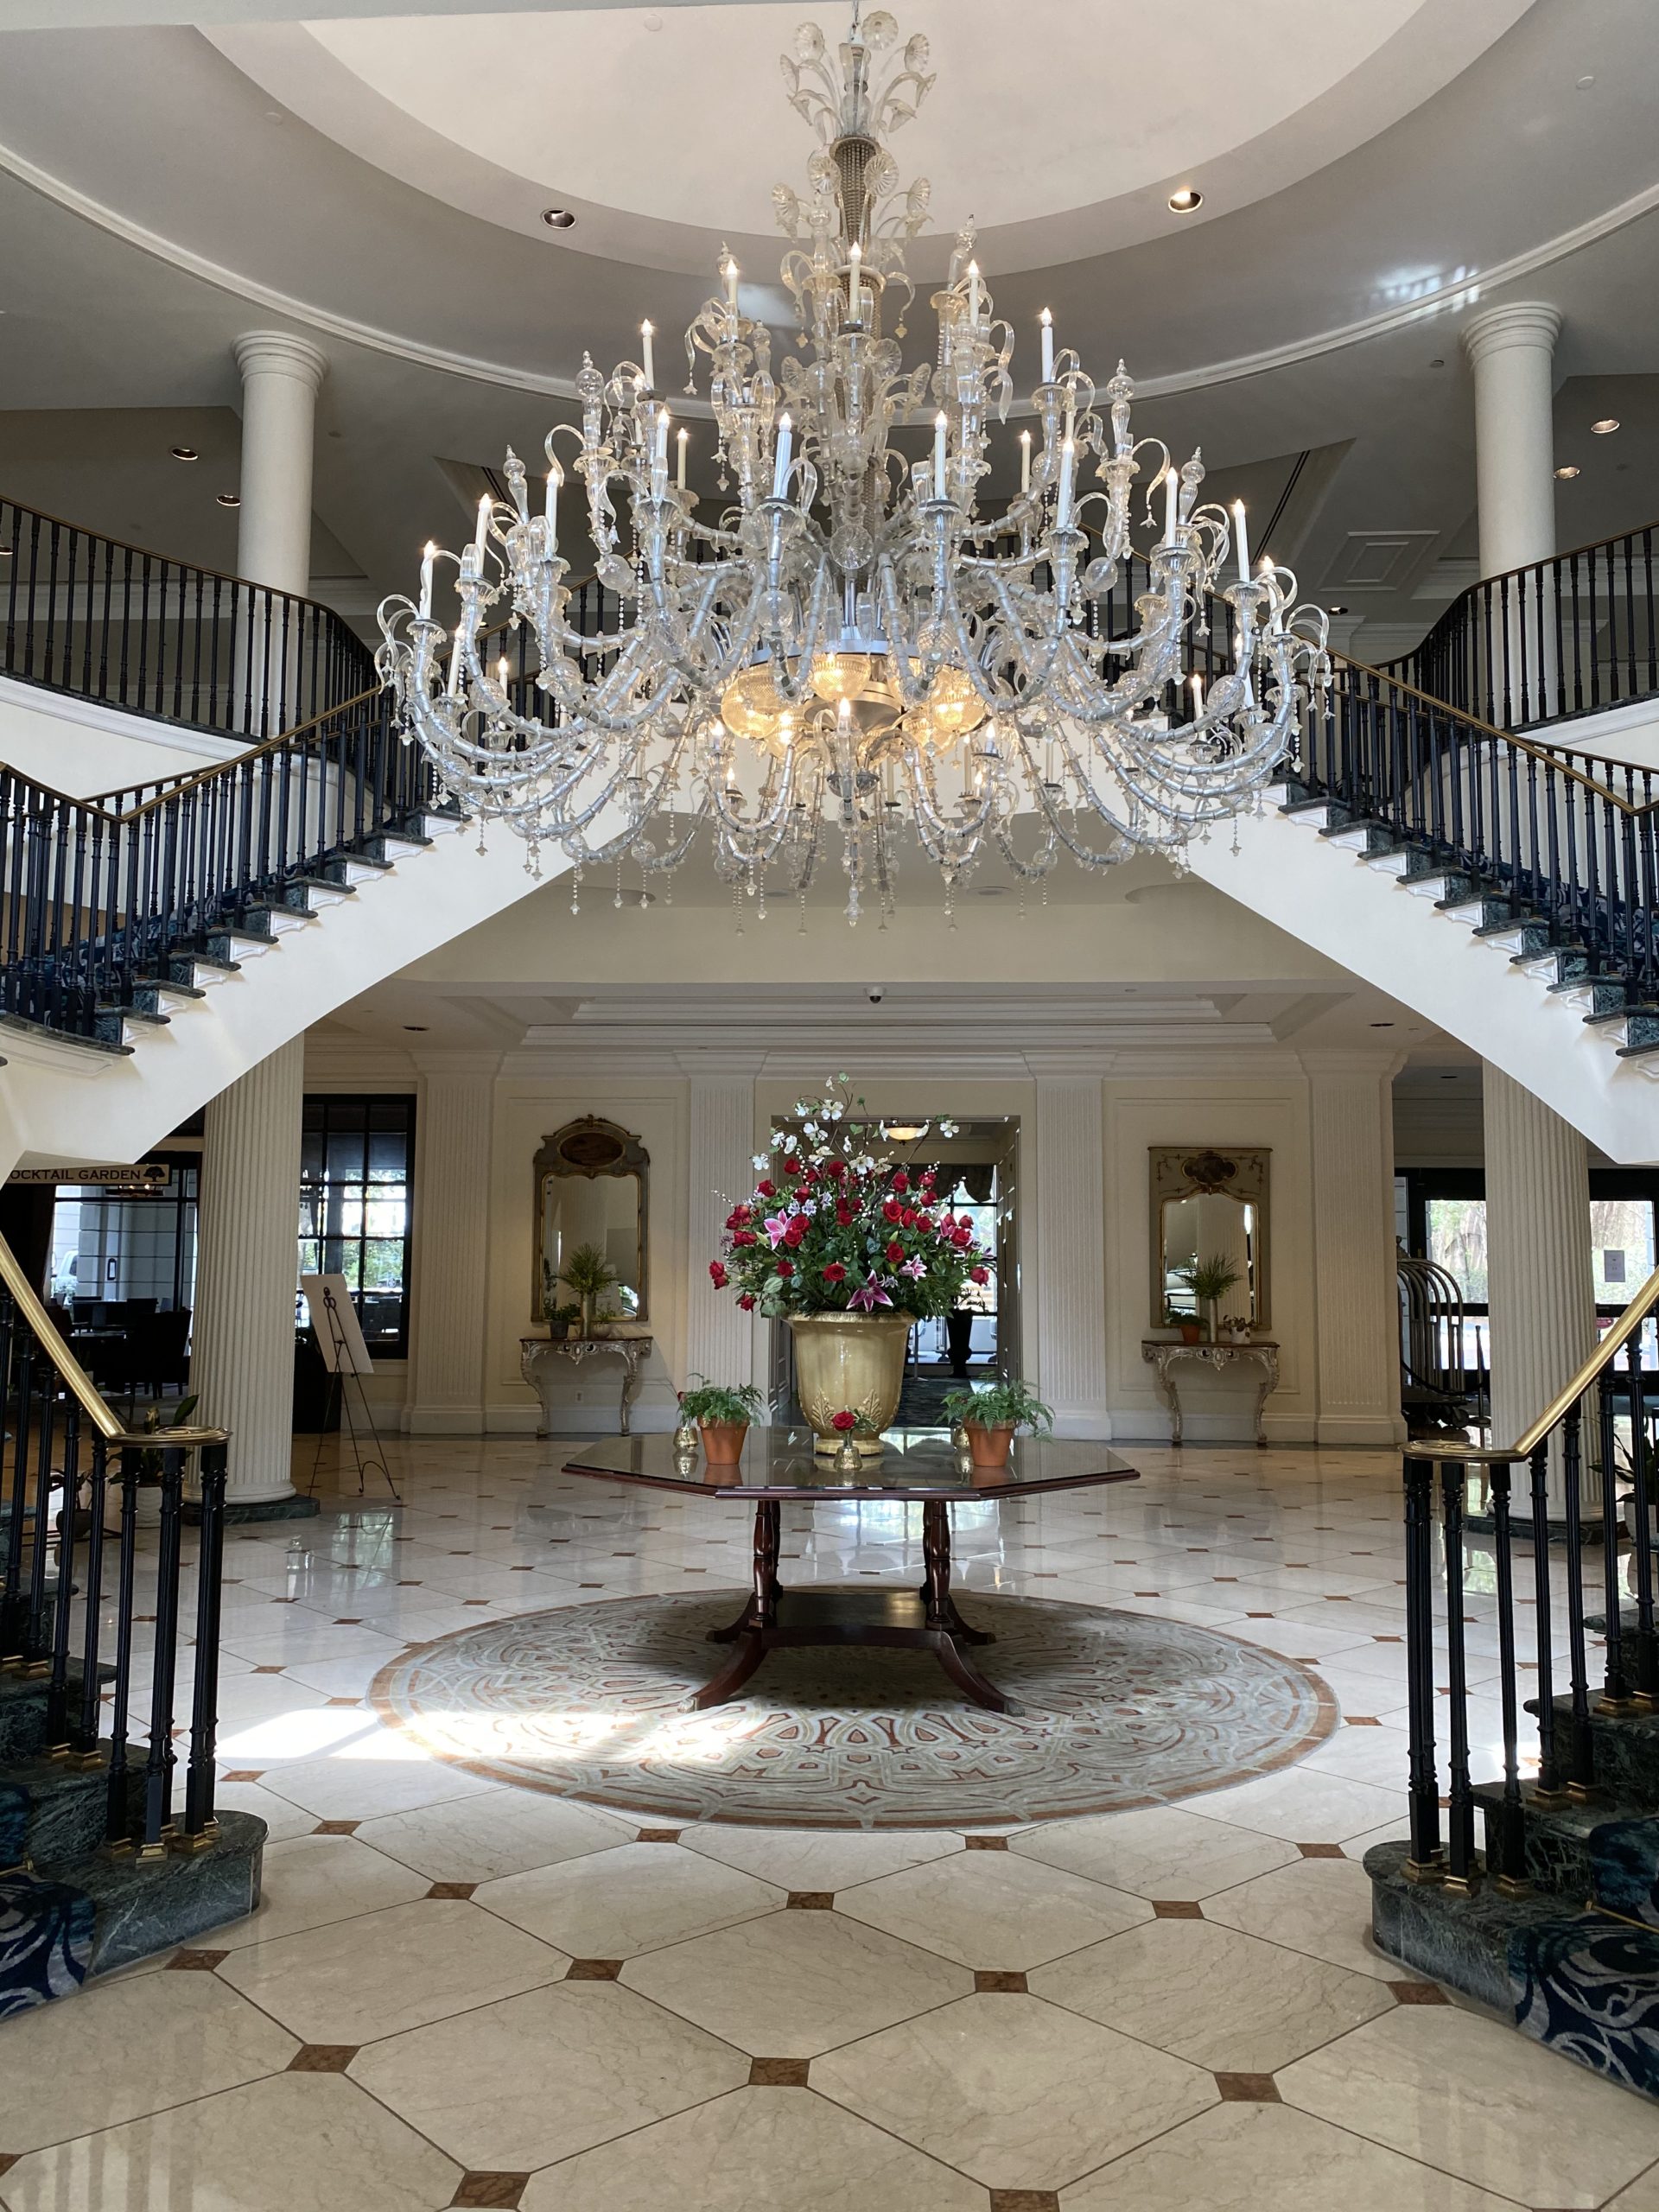 Getaway: 48 hours at the Charleston Place, a Belmond Hotel - Lilac's & Chai